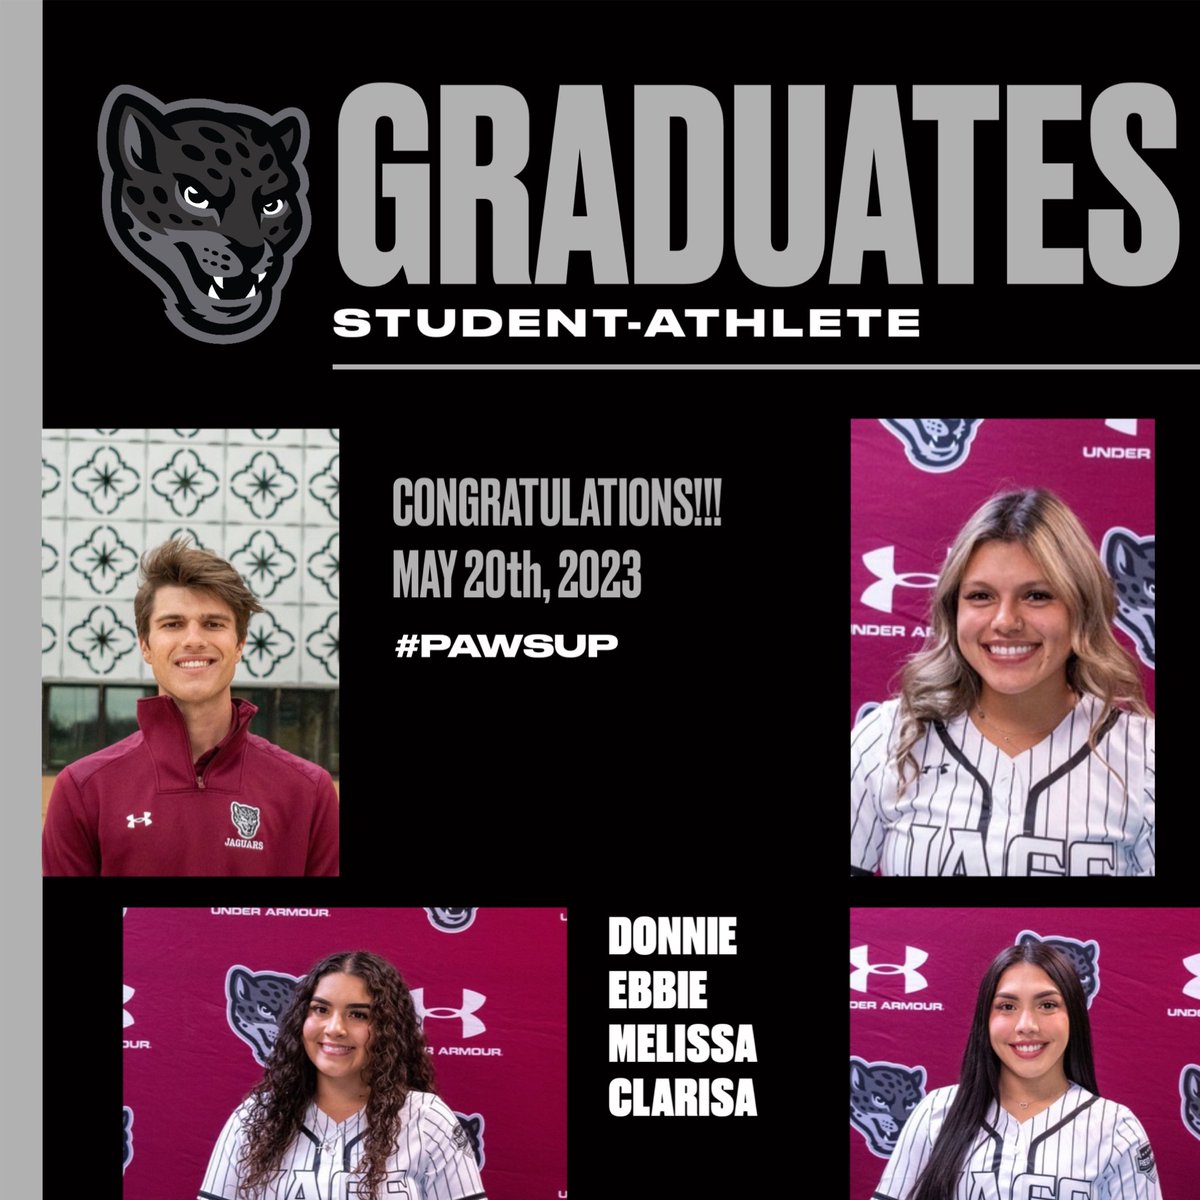 We want to congratulate and celebrate our graduating Jaguars today. #pawsup #graduation